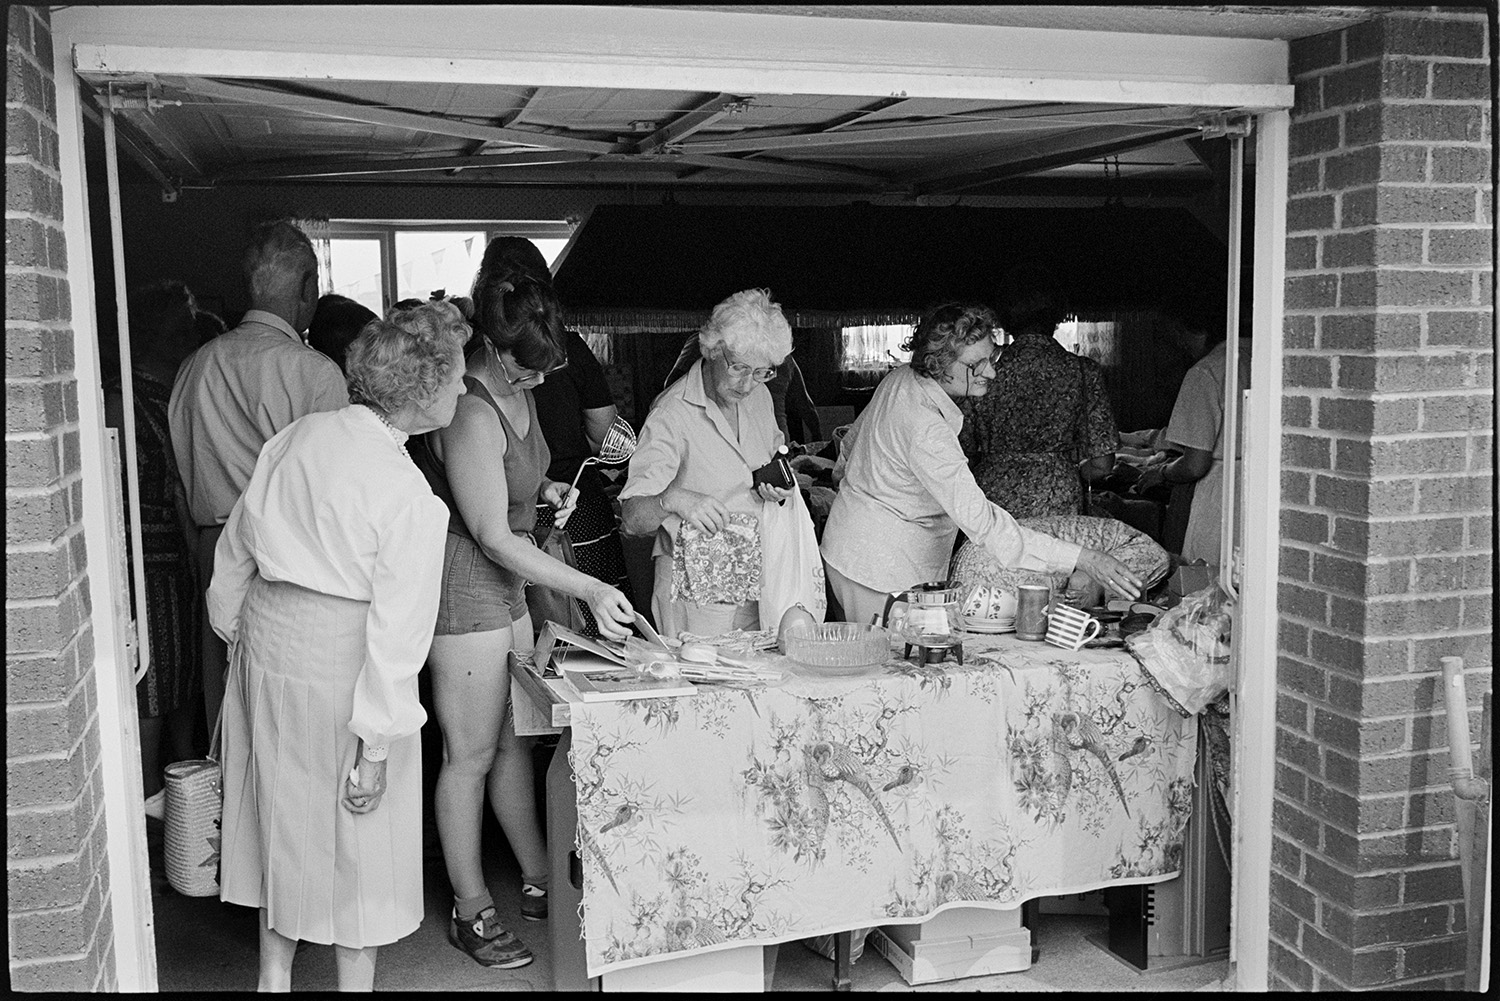 Church fete in garden, stalls, food and cakes.
[Visitors at a stall located in an open garage during a Church fete at Cricket Close, Chulmleigh. Four women are looking through goods on a bric-a-brac stall.]